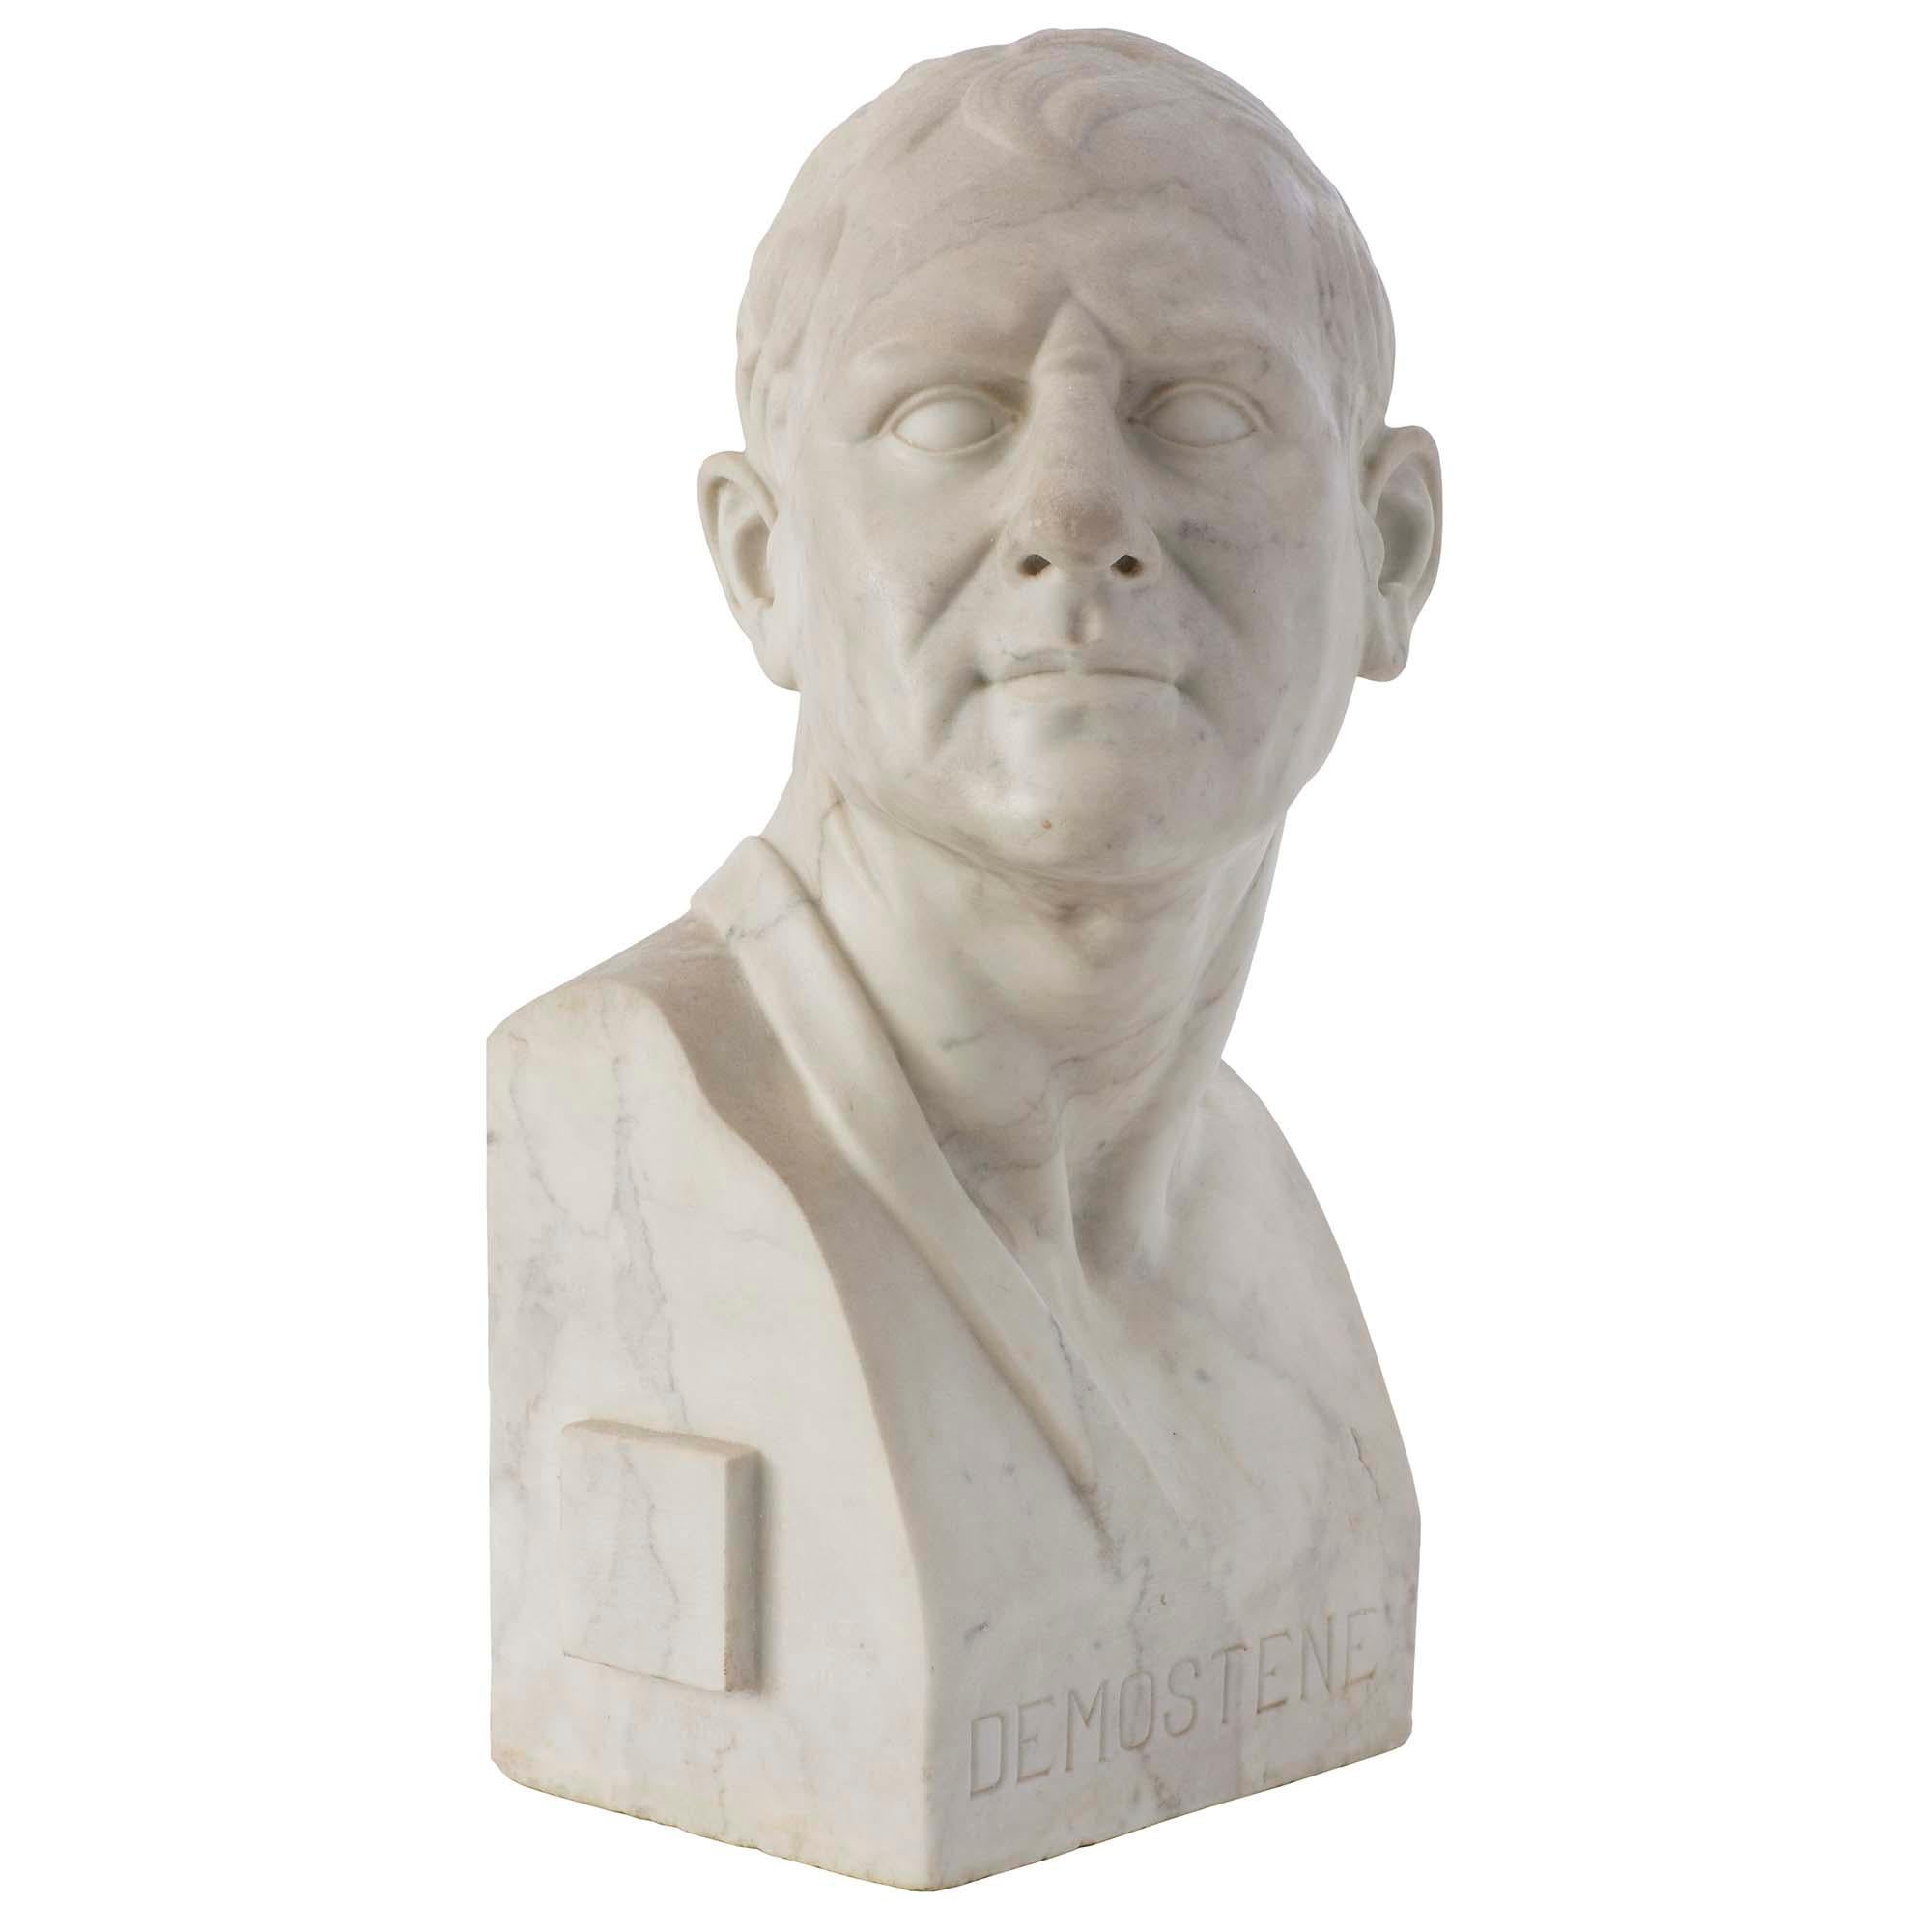 A handsome and richly sculpted French 19th century white carrara marble bust of Demostene. The statue is carved out of a solid piece of white carrara marble and displays the subjects name at the front. With wonderful details and facial expression.